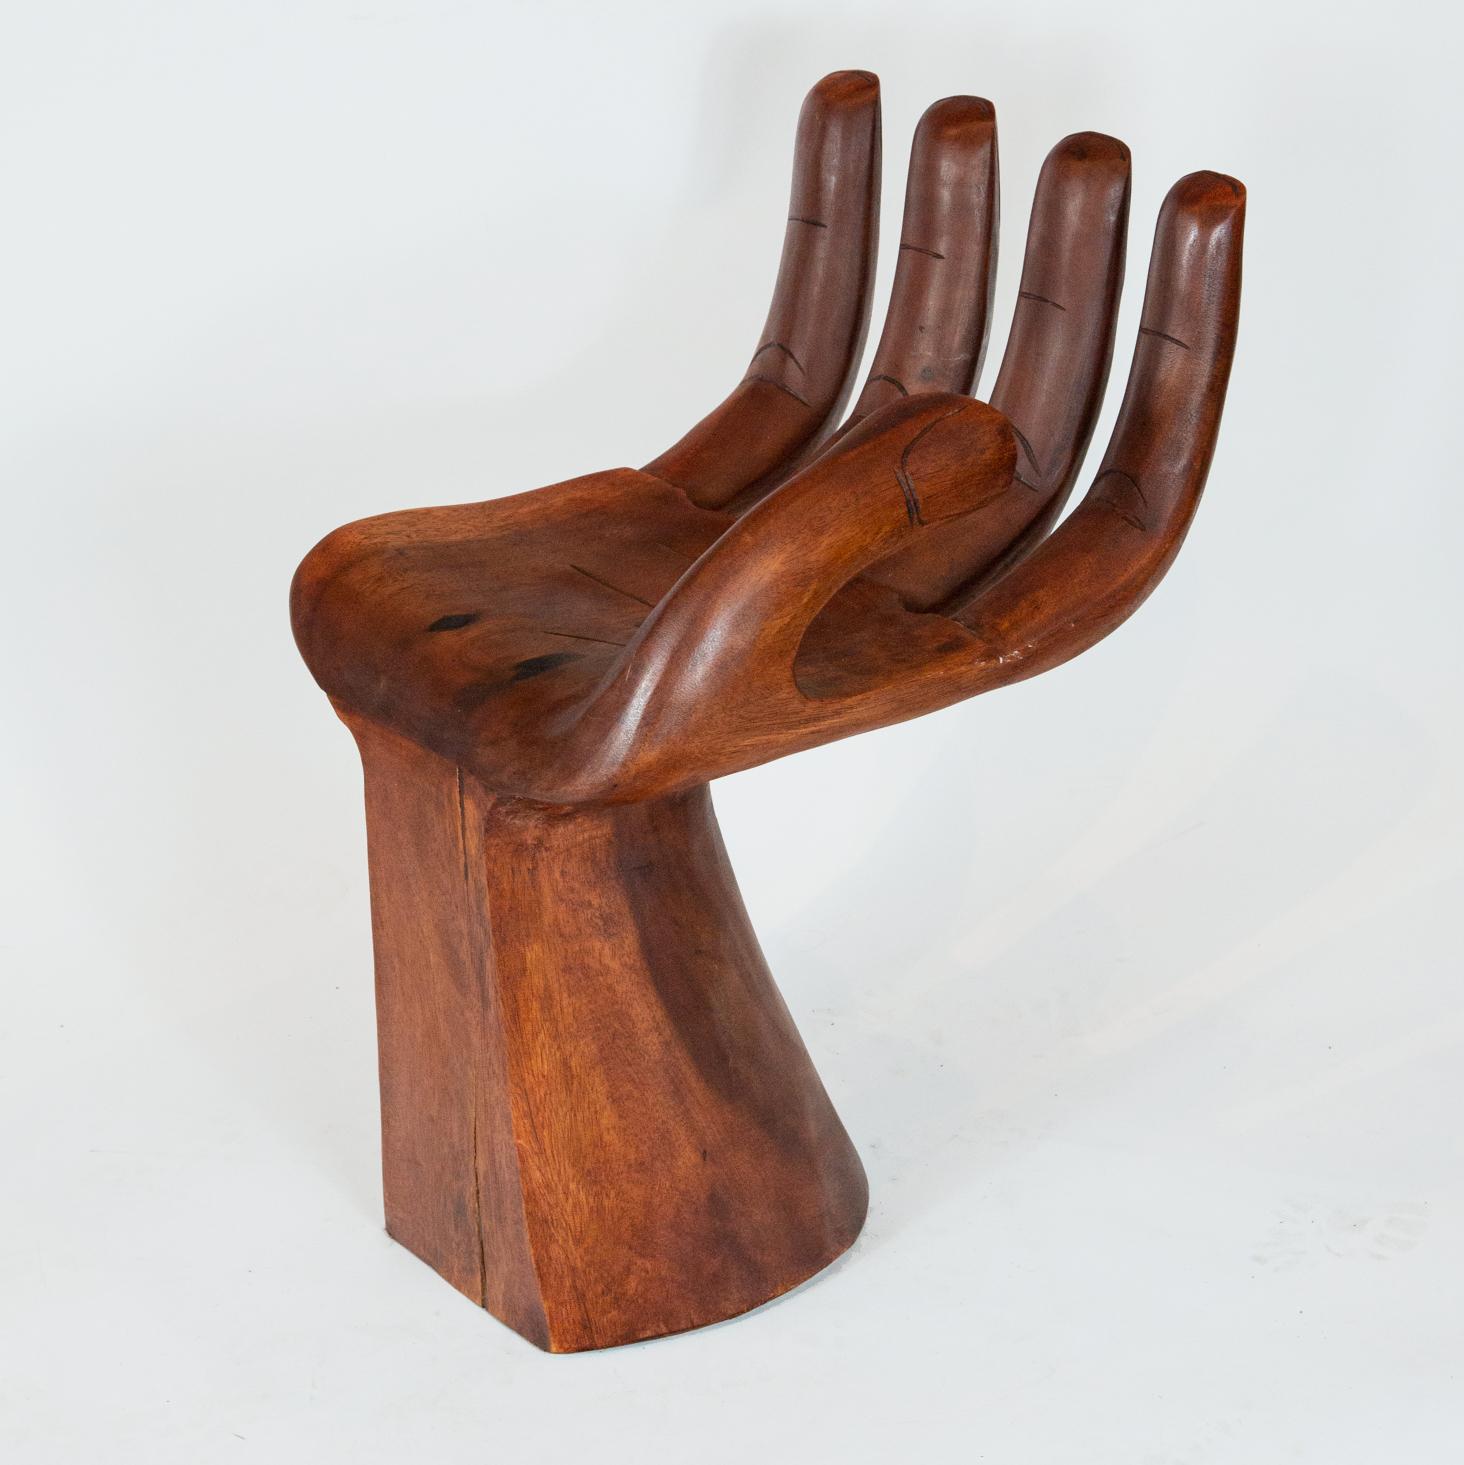 Hand-Carved Mid-20th Century Wooden Hand Chair